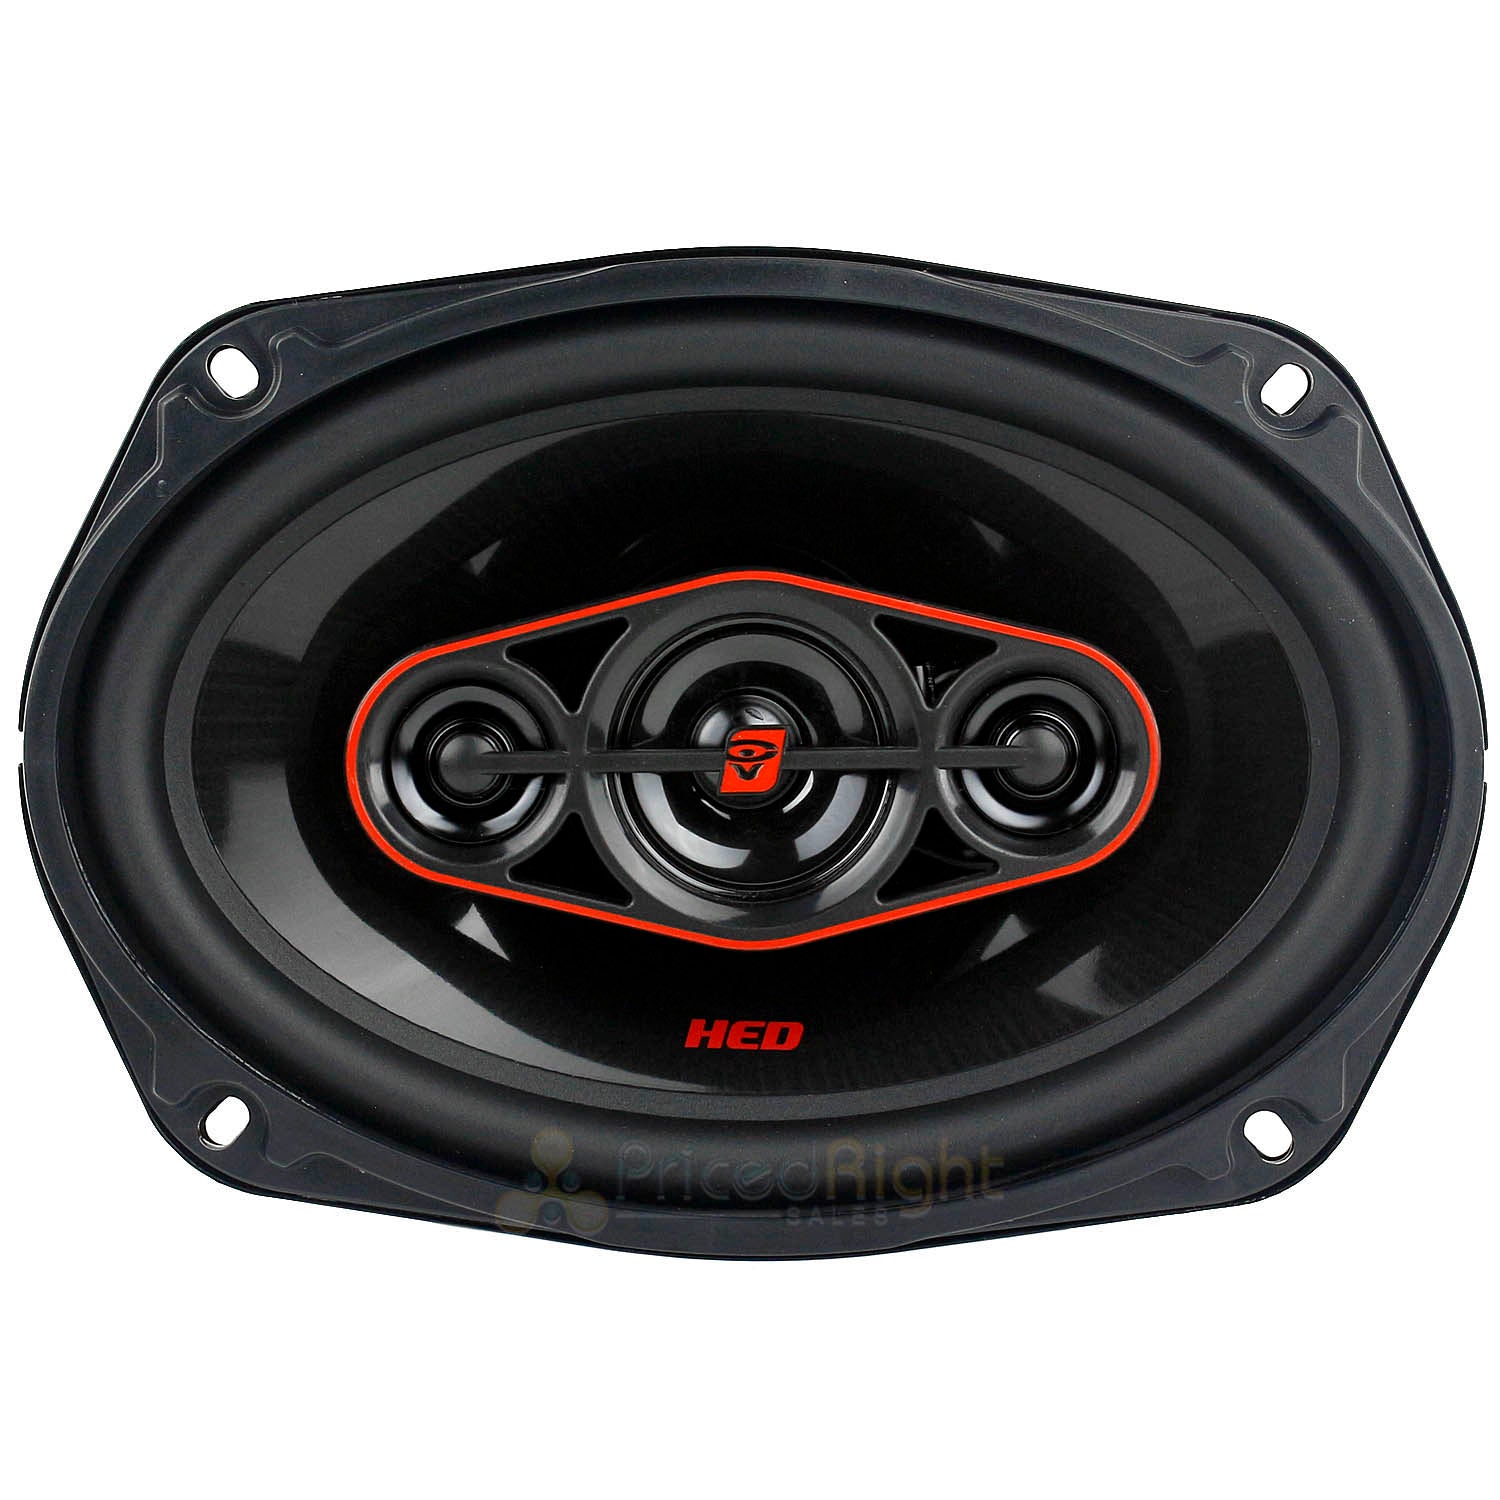 Cerwin Vega 6x9" 4 Way Coaxial Speaker System 440 Watts Max Hed Series H7694